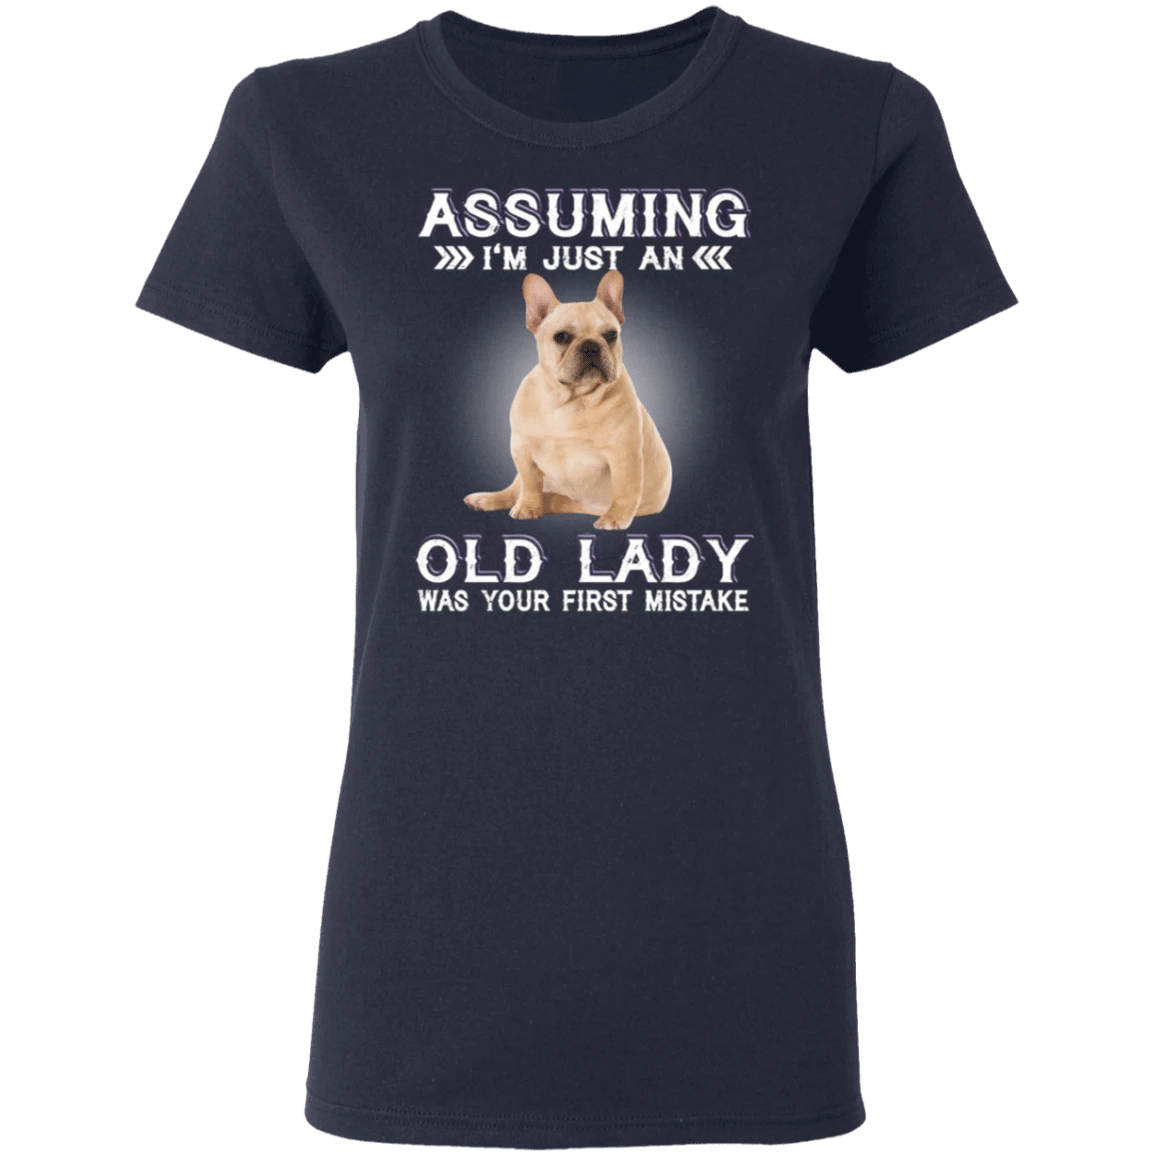 Assuming I'm Just An Old Lady - French Bulldog Shirts With Quotes Funny Gag Gifts For Womens.